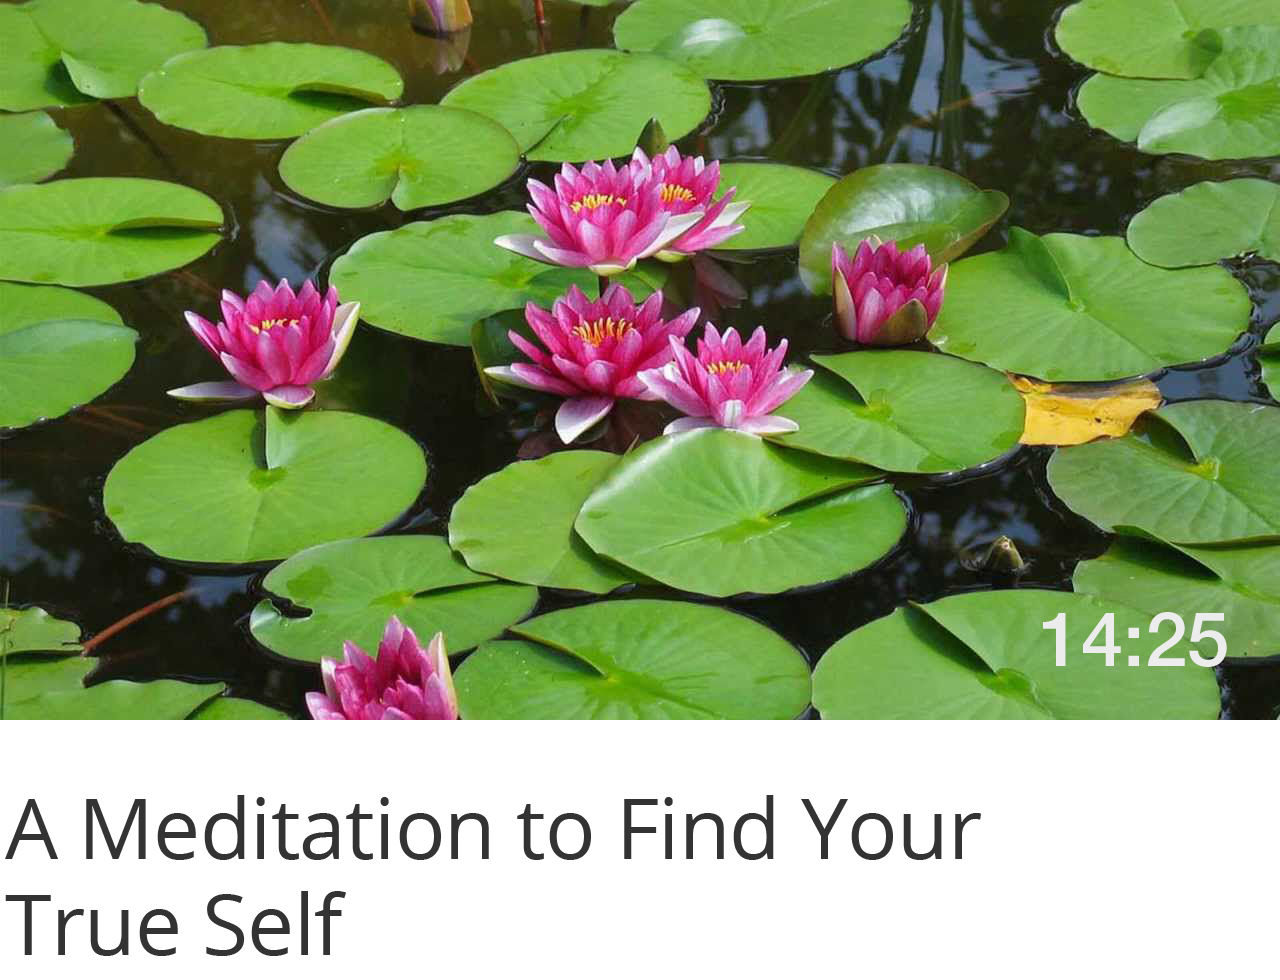 A Meditation to Find Your True Self